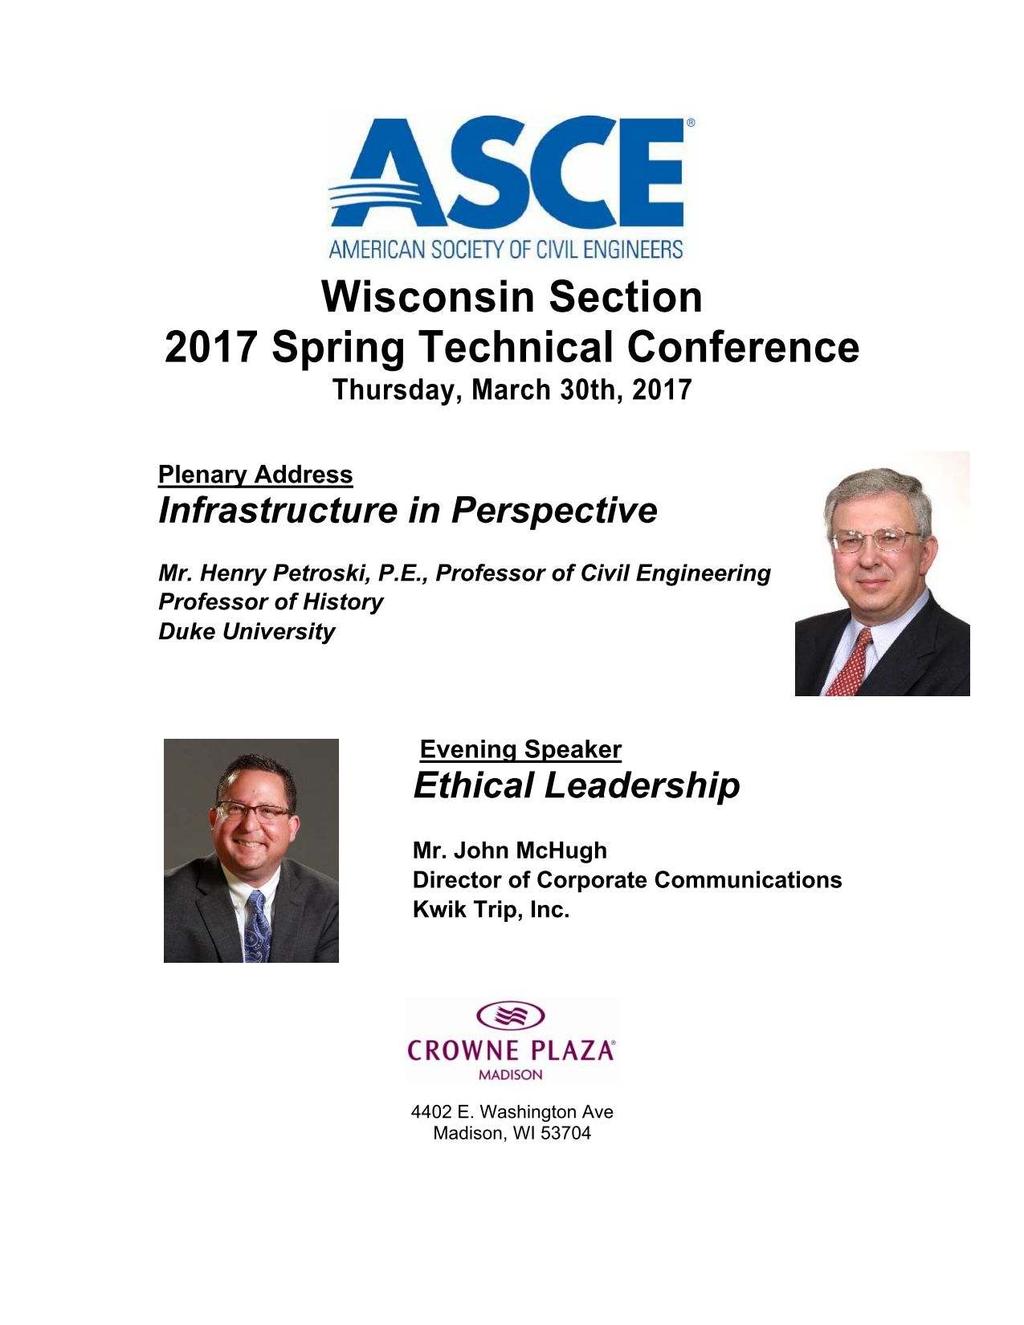 2017 Wisconsin Section Spring Technical Conference Article By: ASCE Wisconsin Southwest Branch The Southwest Branch cordially invites you to attend the Wisconsin Section 2017 ASCE Spring Technical